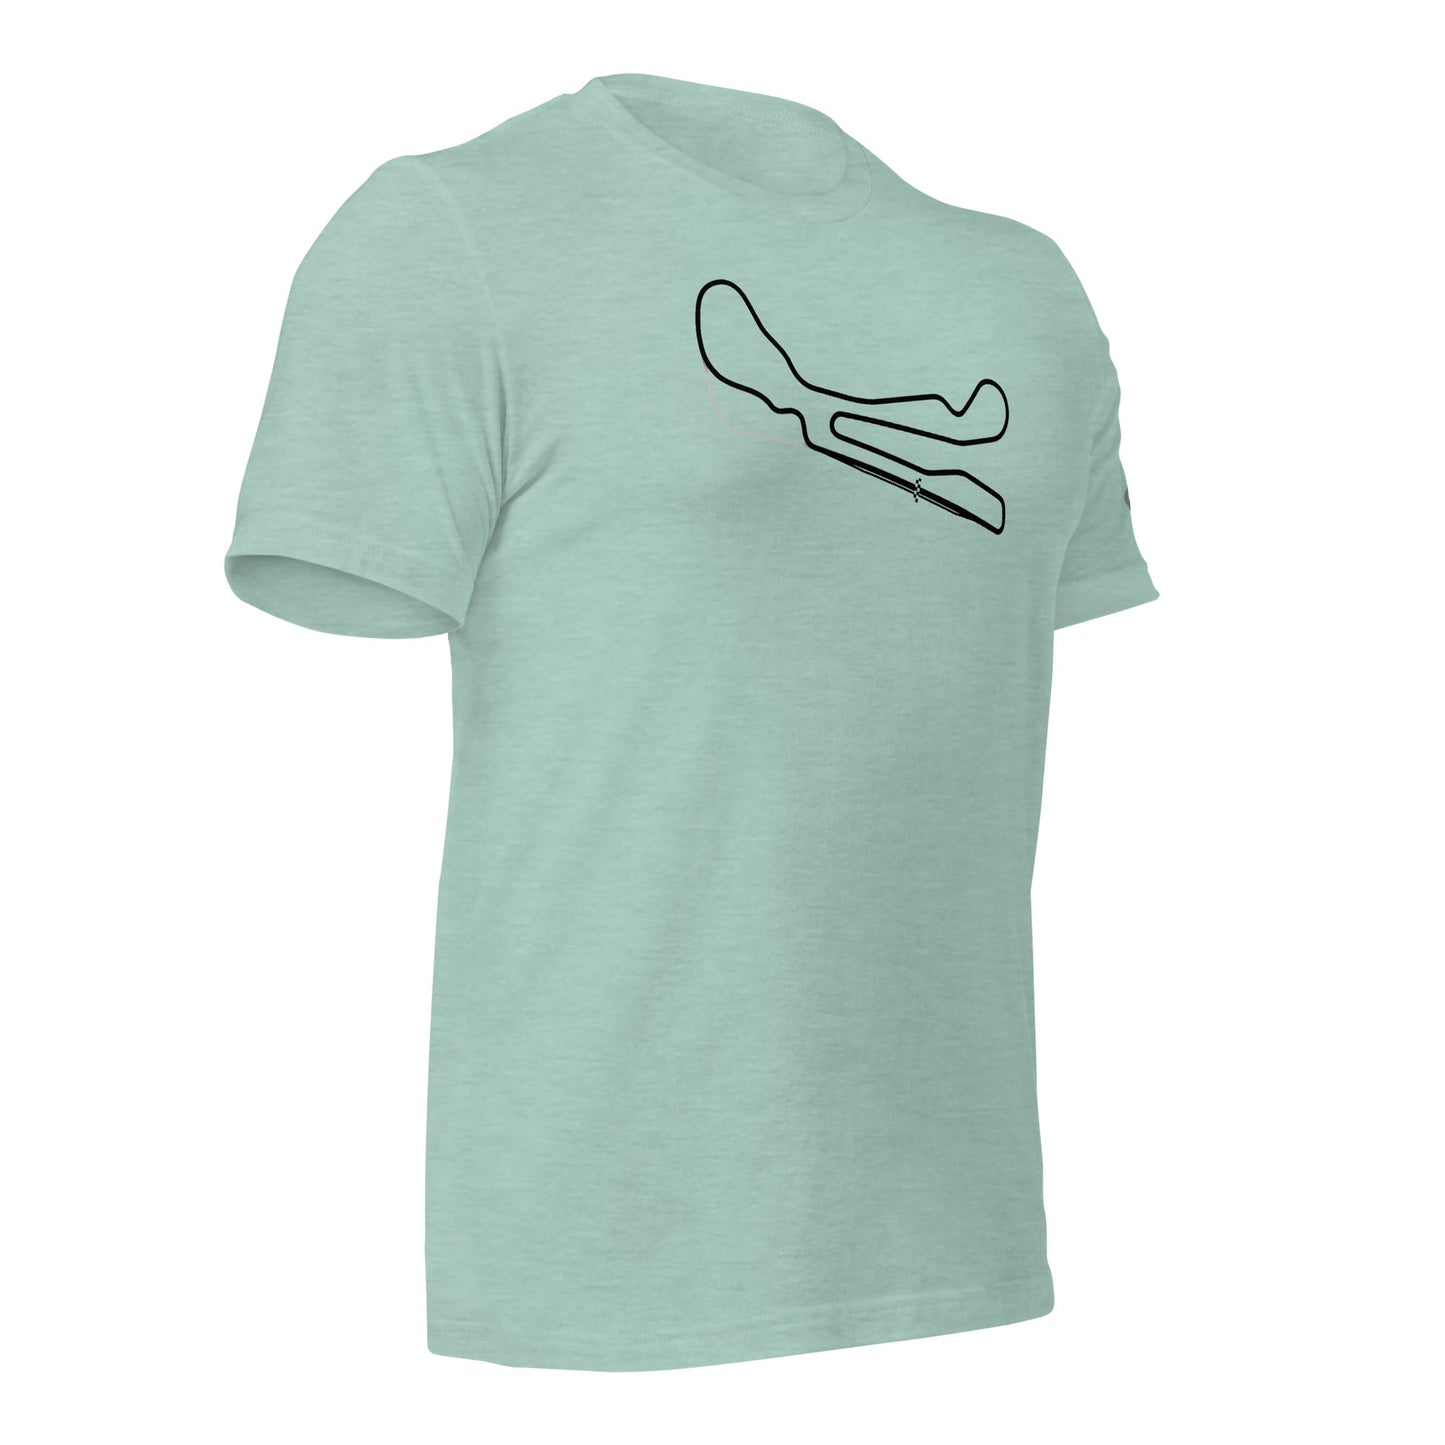 CIRCUITO MIKE G 100% cotton Tee - Track map - Mint 4